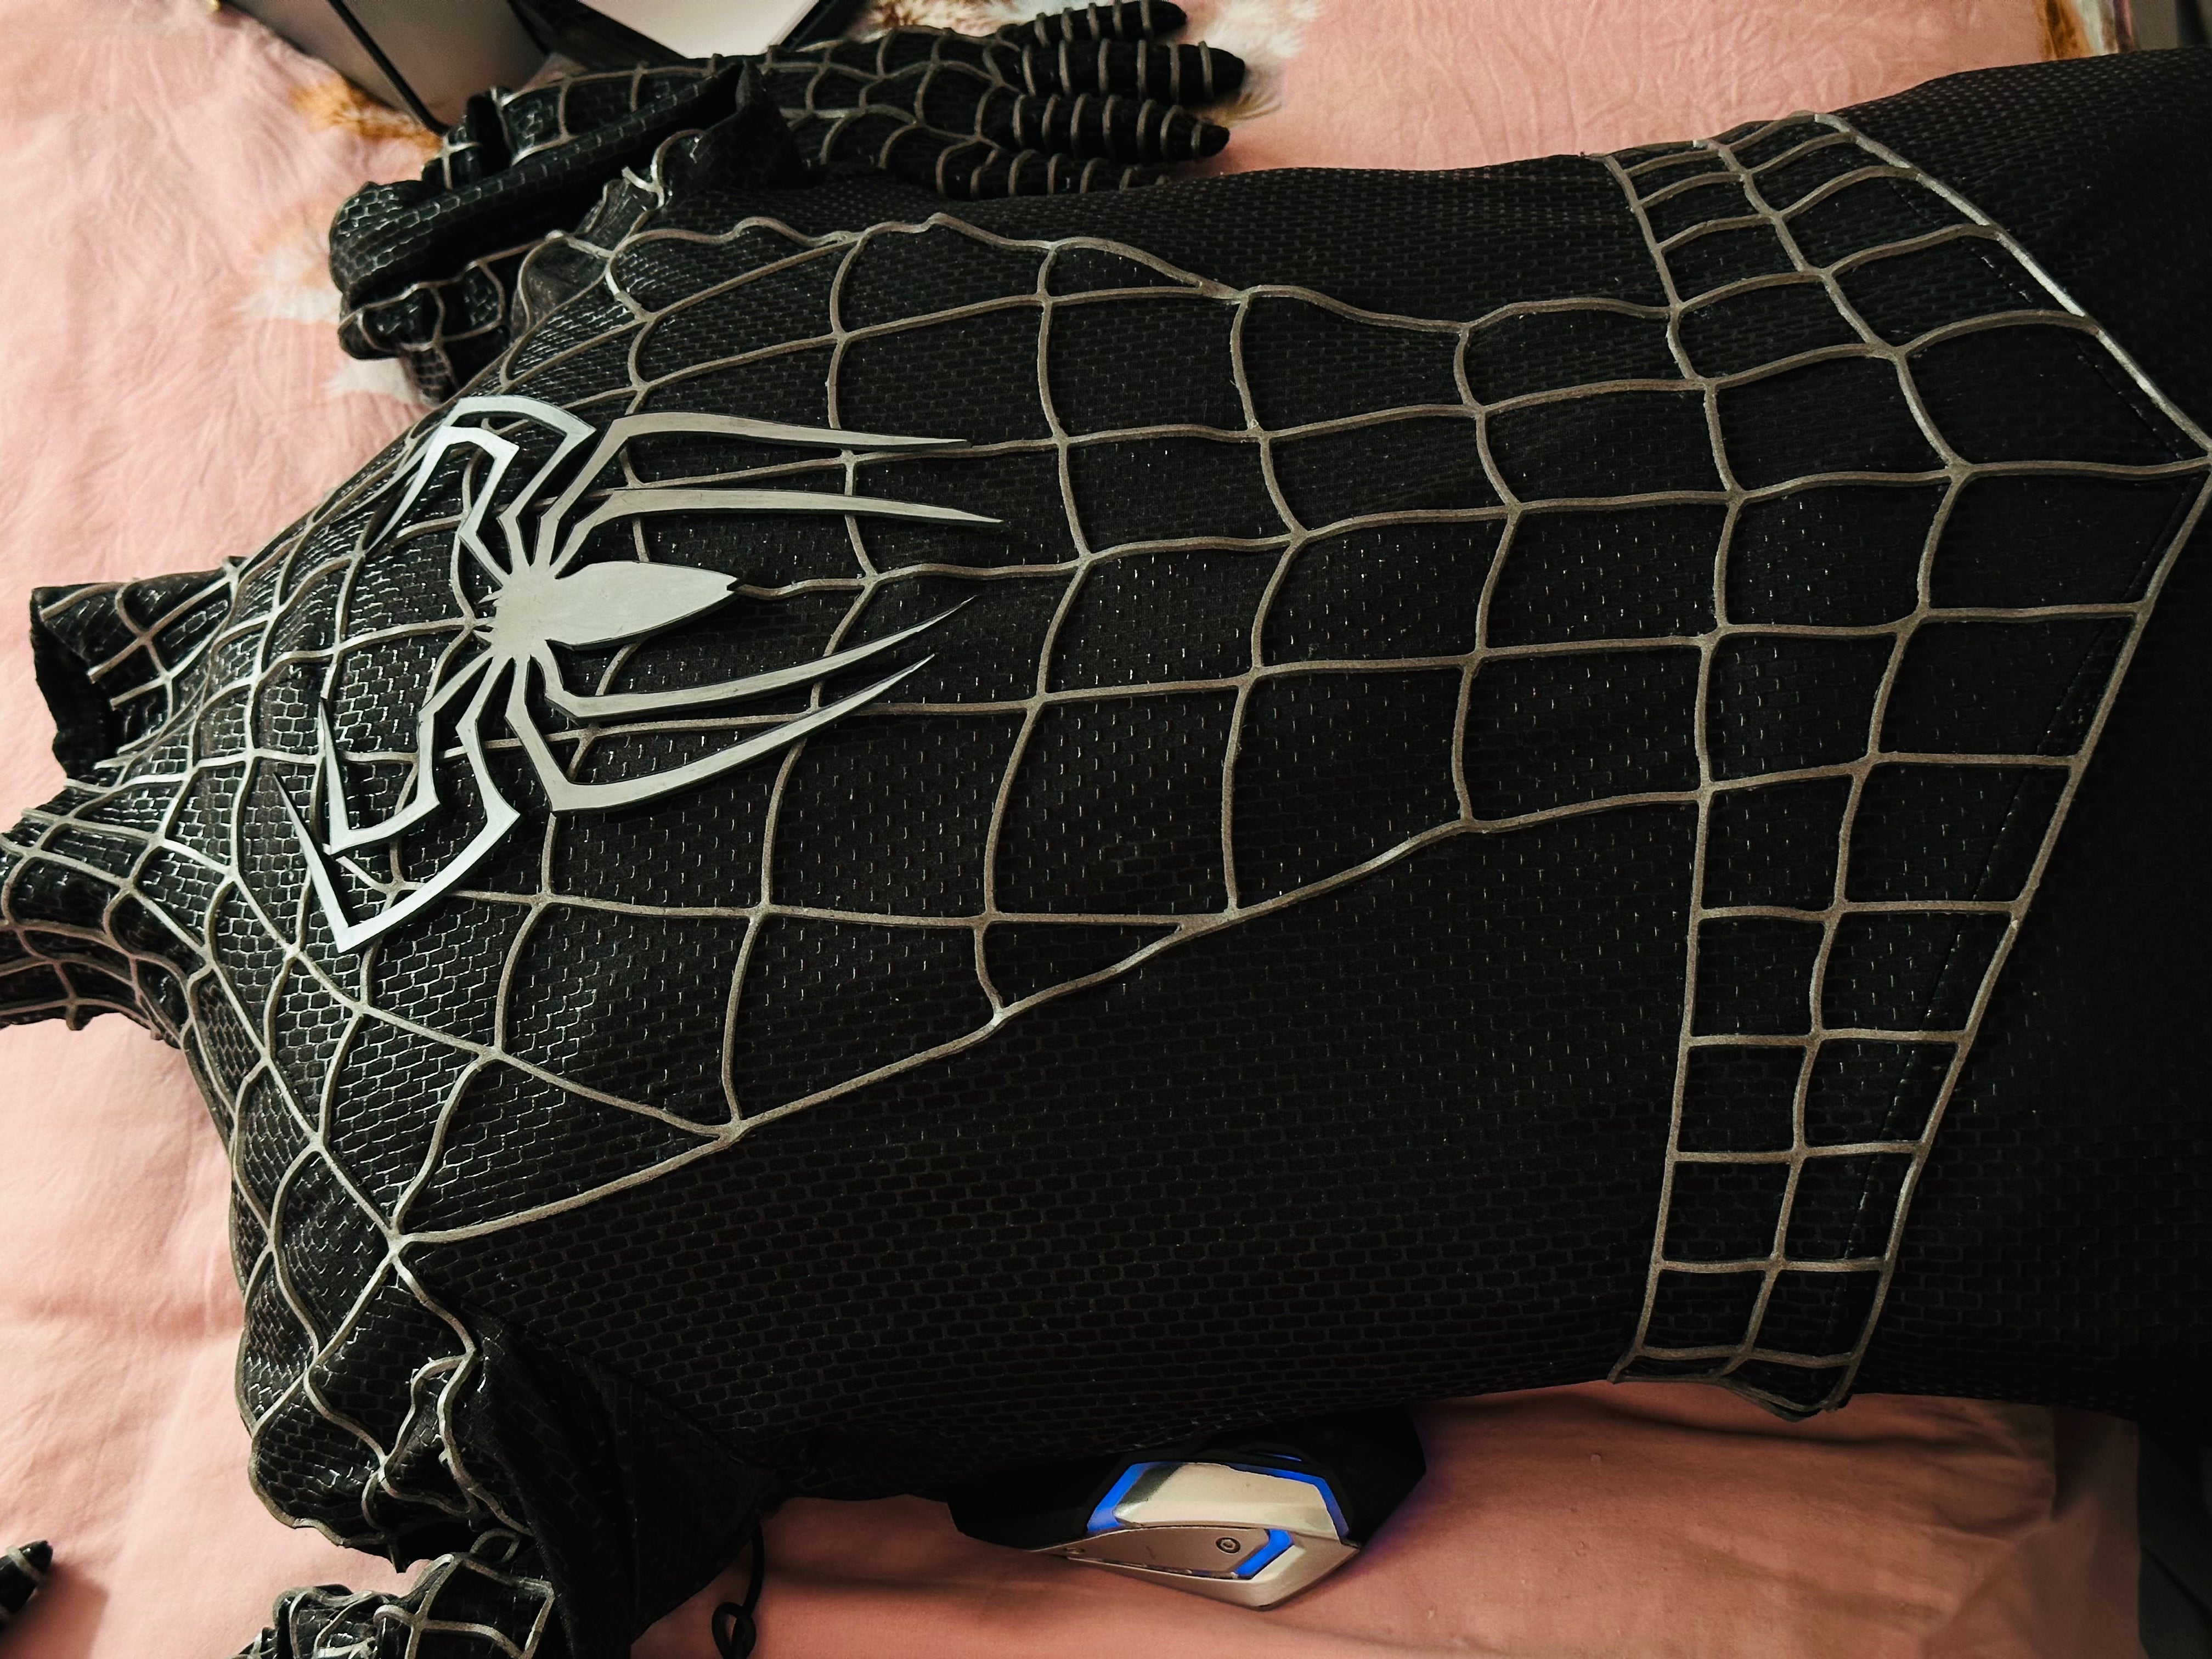 Spidey3 Venom suit,SAM RAIMI TOBEY version with Face shell & 3D Rubber Web Movie Prop Replica(wearable)